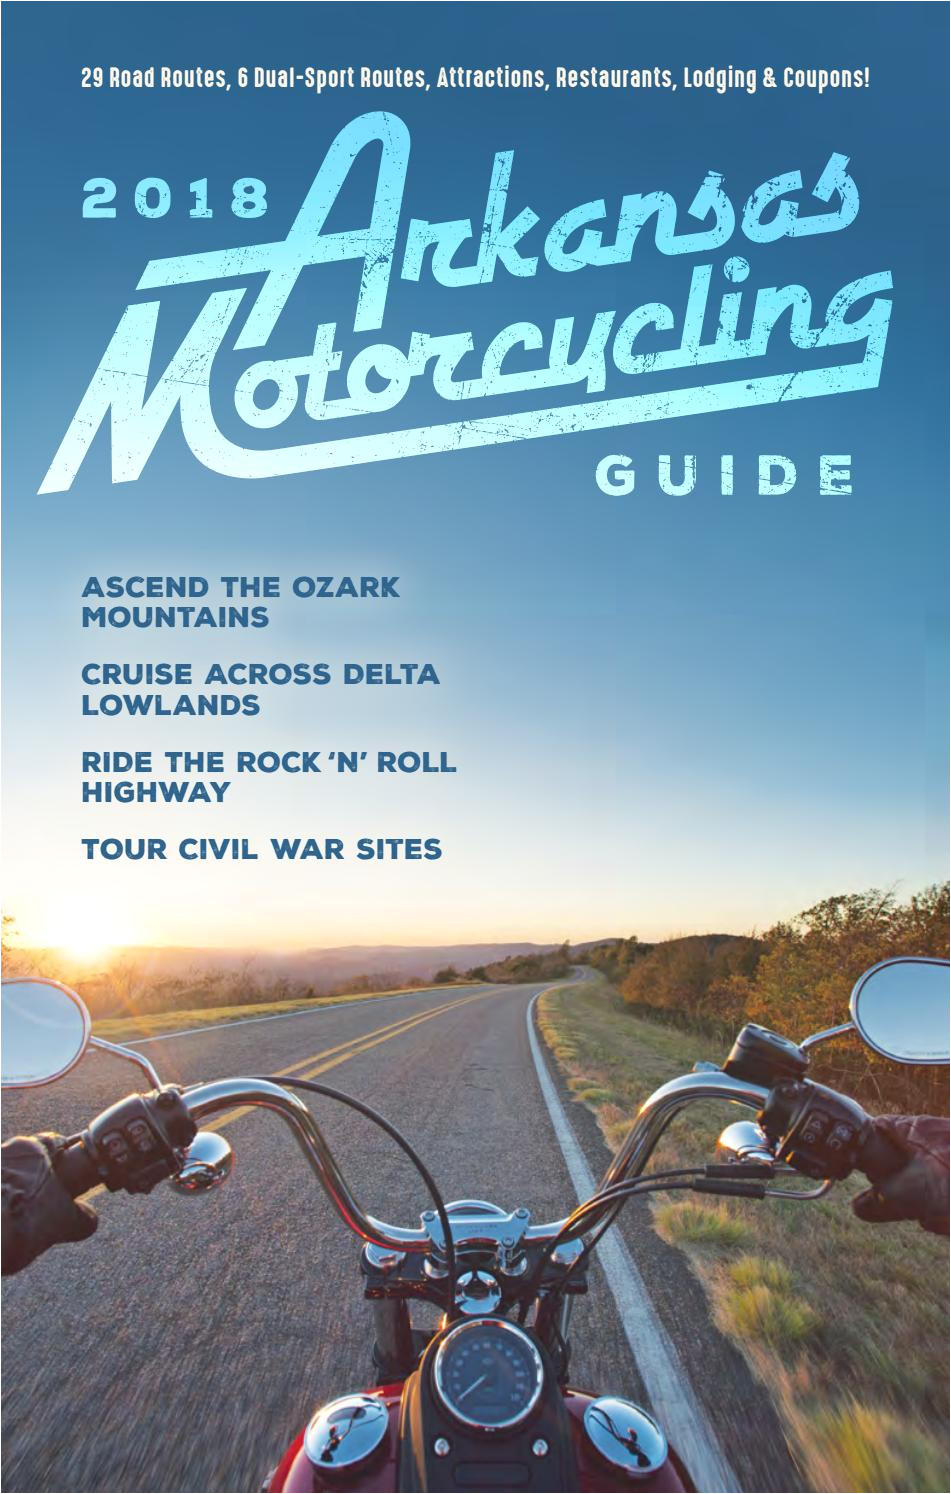 2018 arkansas motorcycling guide by arkansas department of parks and tourism issuu